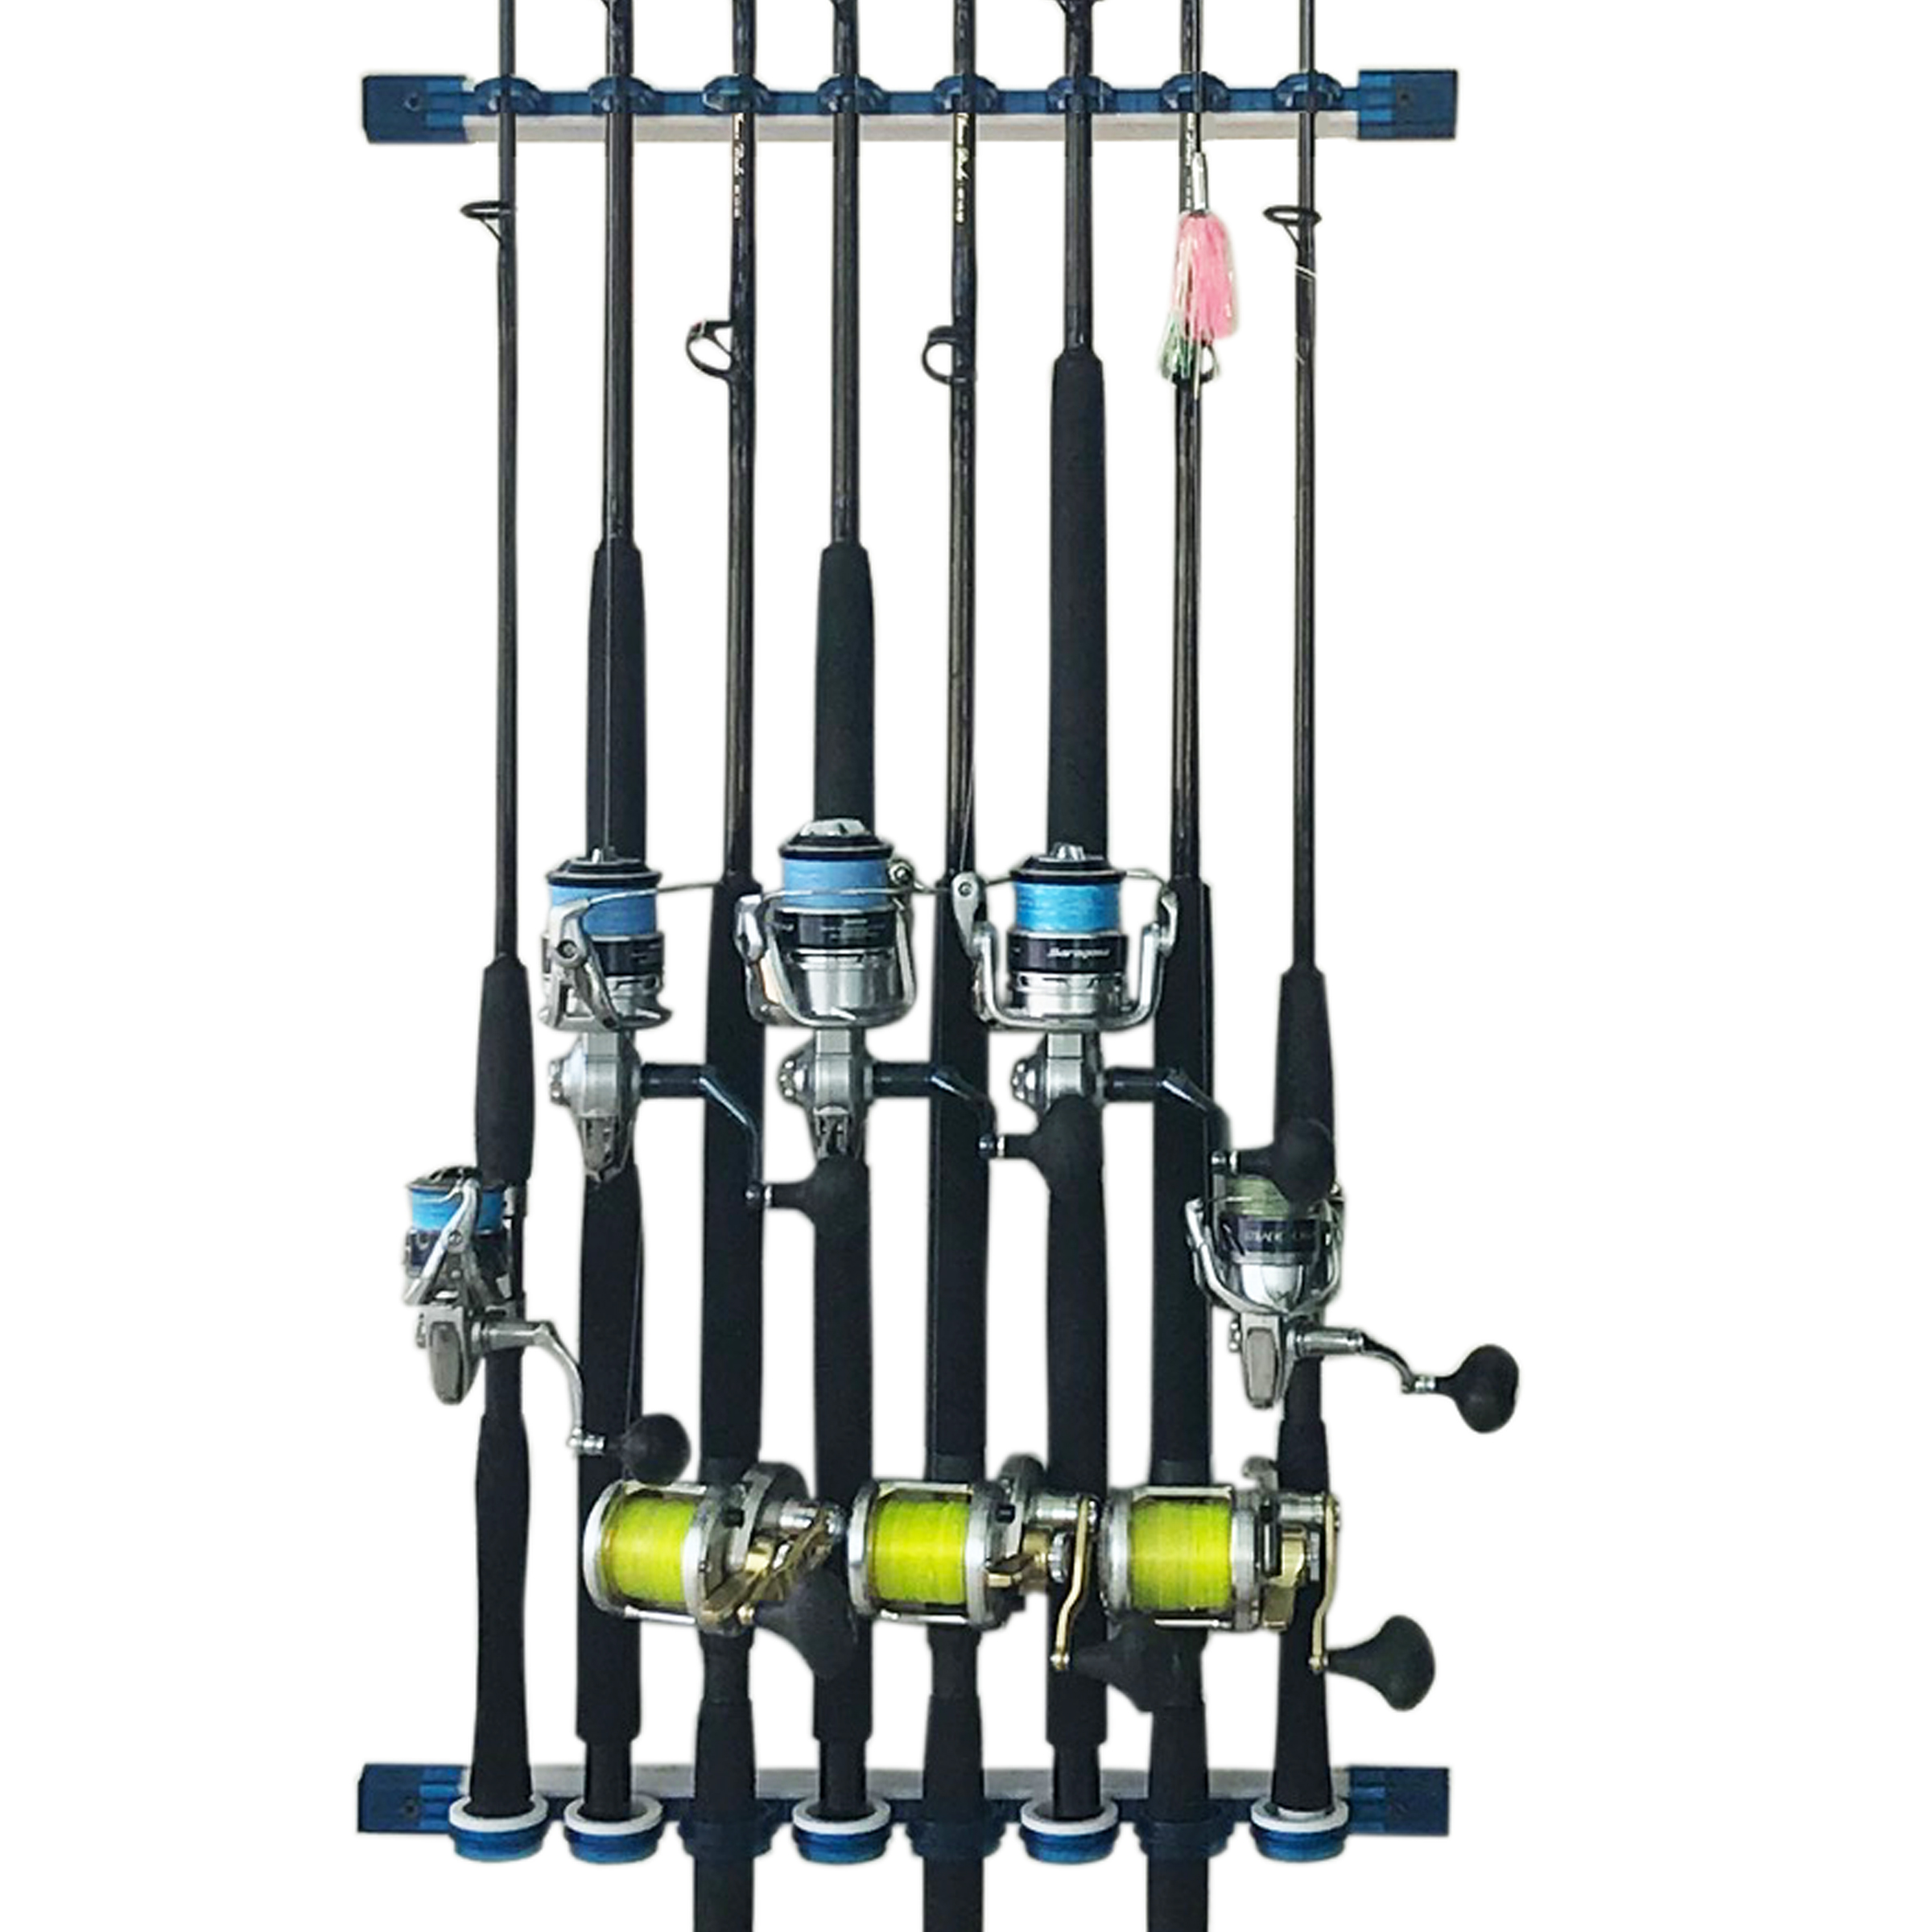 Abs Plastic Fishing Rod Holders Stand